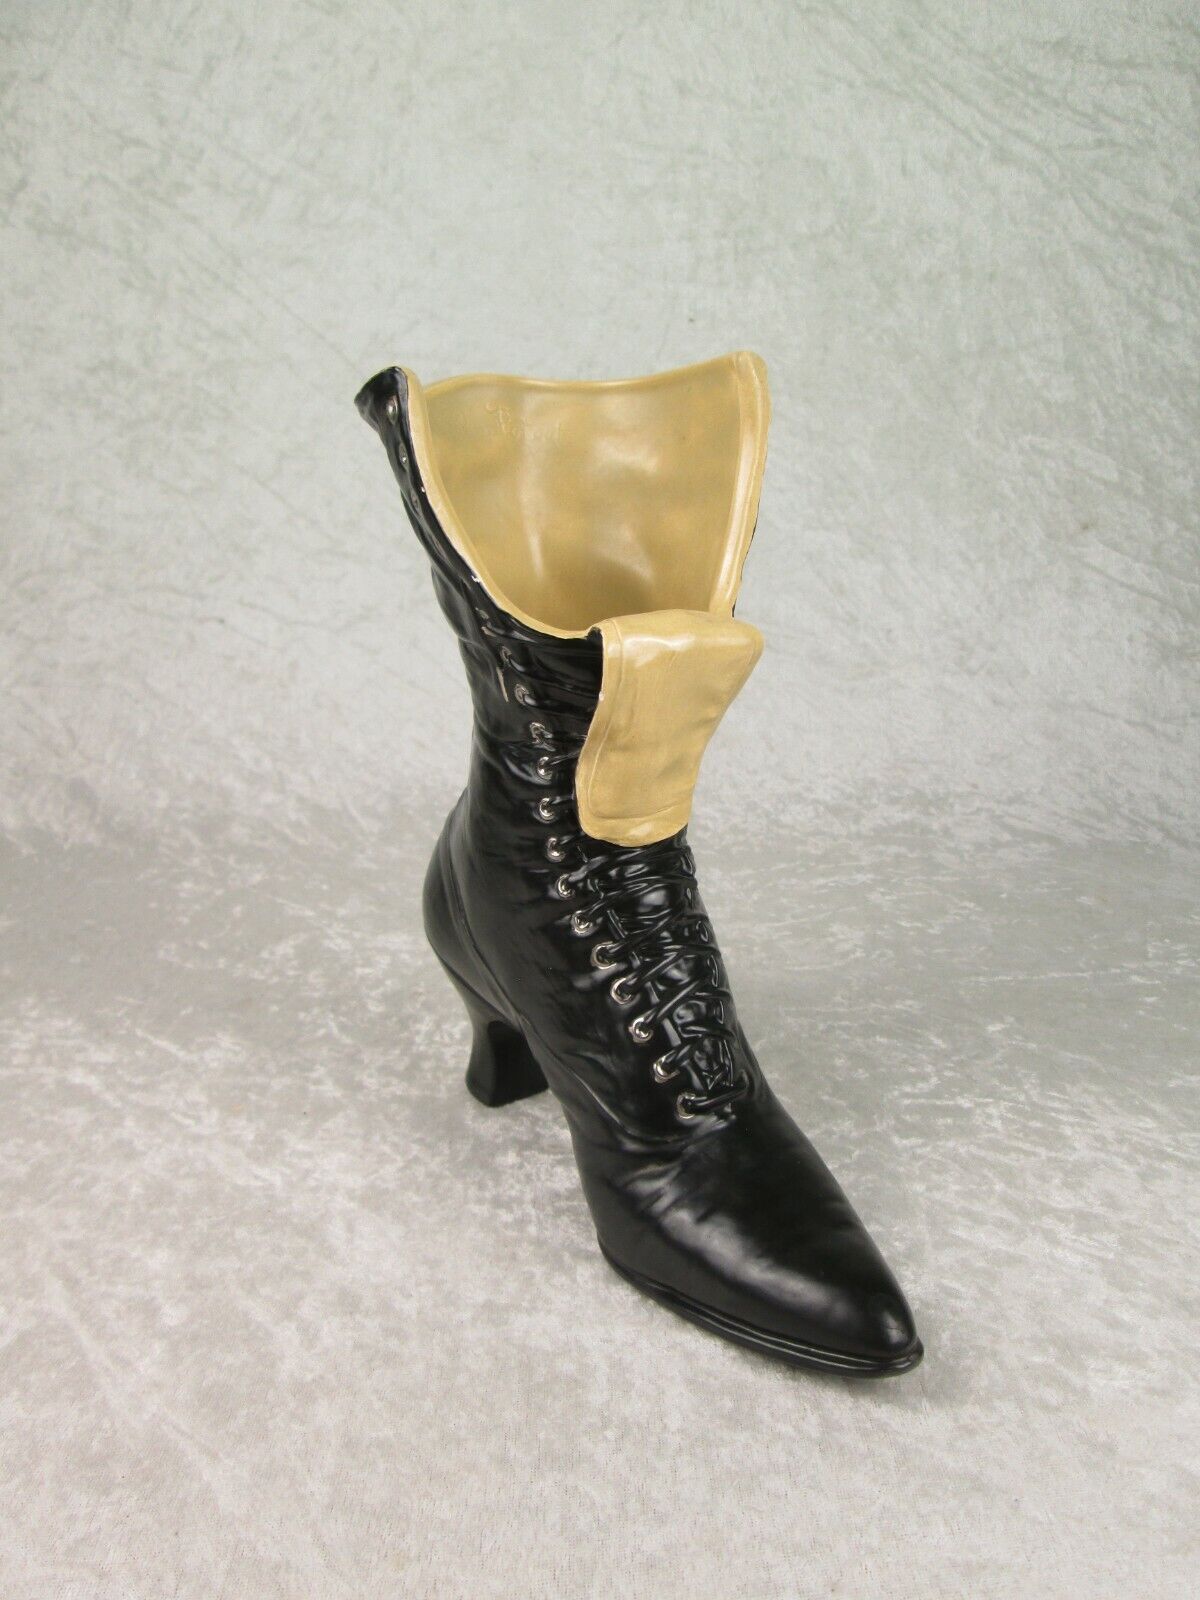 Ceramic Victorian Boot Shoe Vase Planter Pottery Black Tan 9-1/2 inches Tall